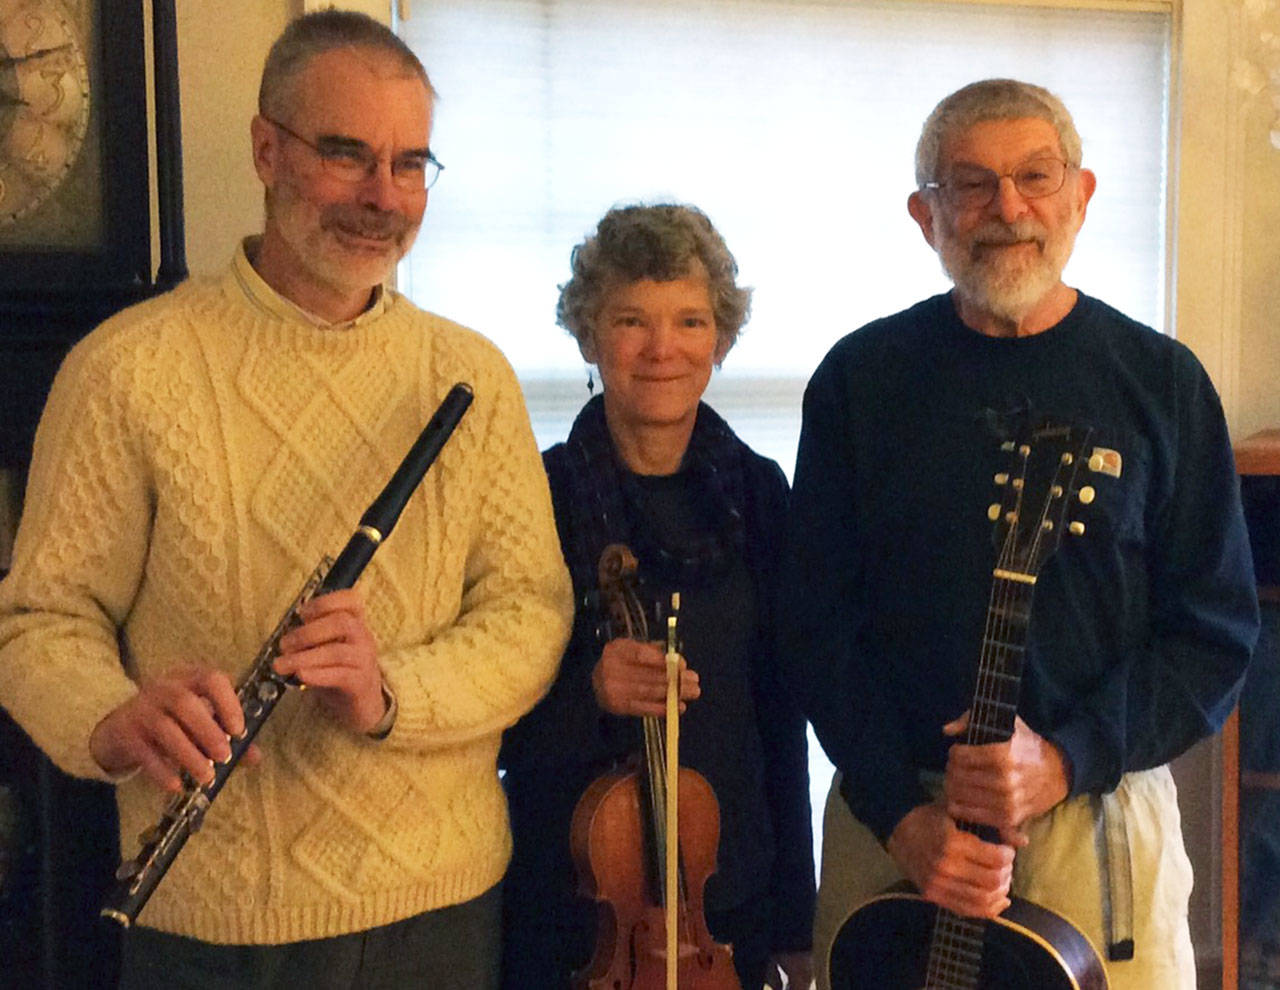 Contributed photo/San Juan Island Contra Dance The Luddite Ramblers (from l to r): Craig Shaw, Laurel Stone, Jay Finkelstein.